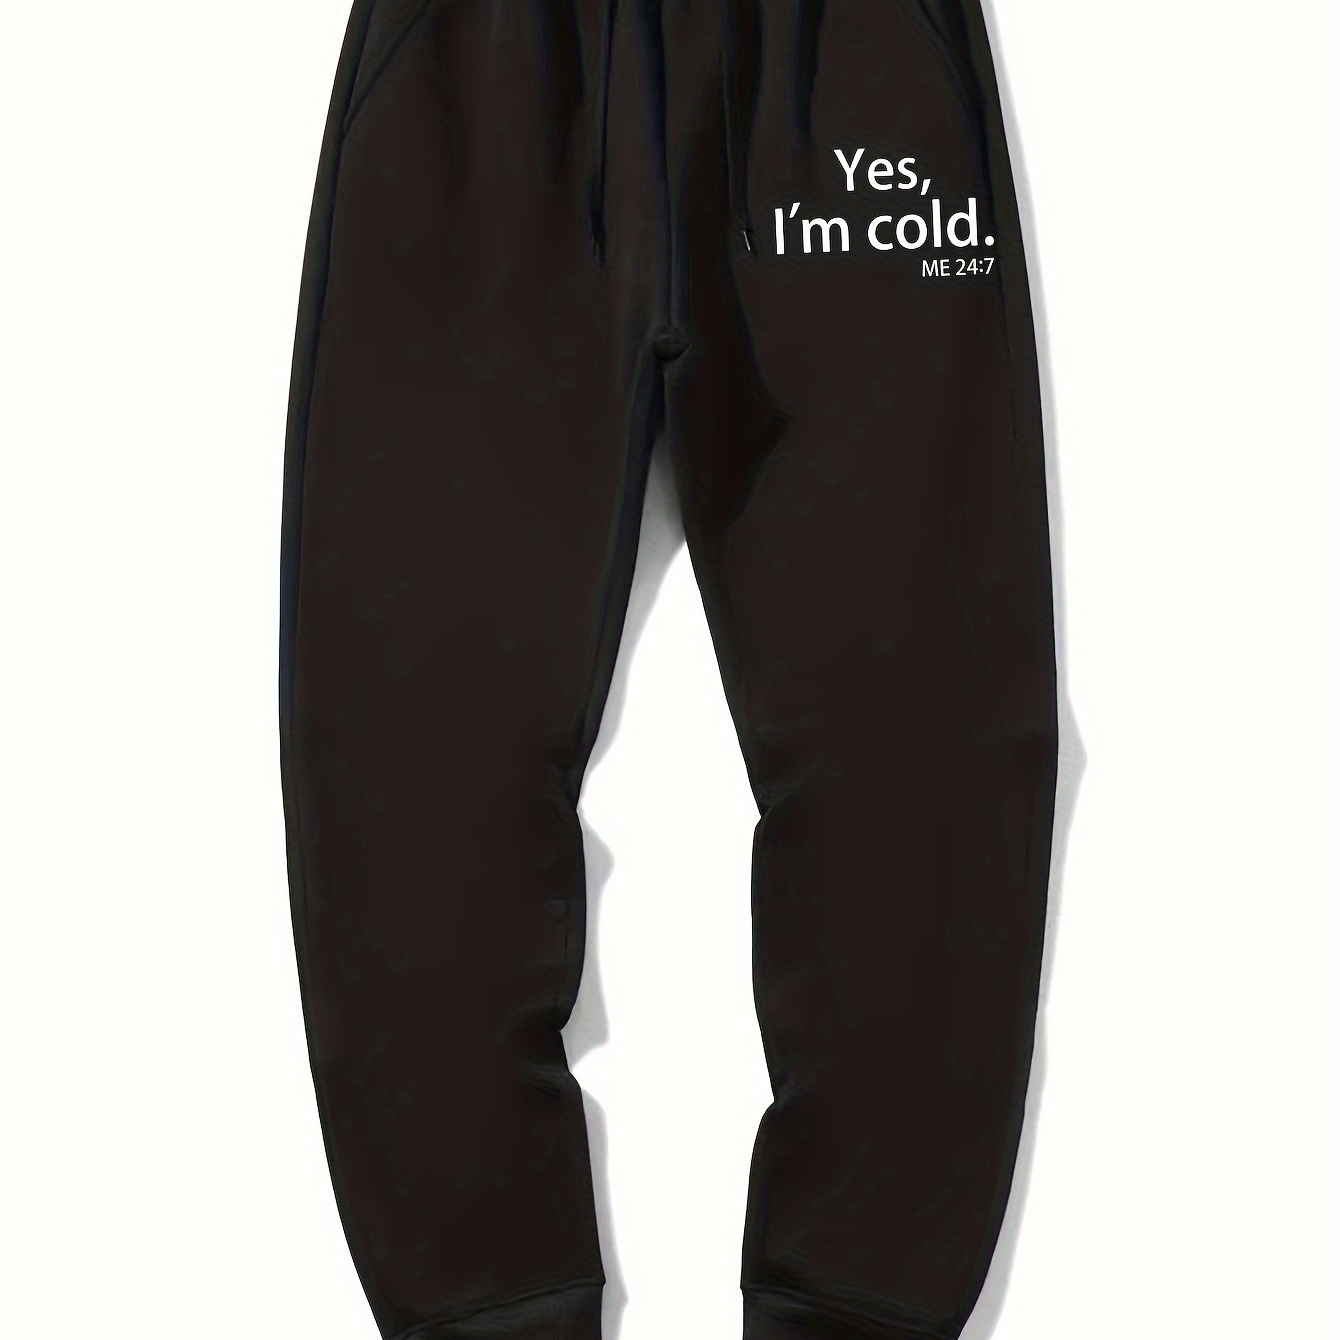 

''yes I'm Cold'' Pattern, Men's Drawstring Sweatpants, Pocket Casual Comfy Jogger Pants, Mens Clothing For Autumn Winter